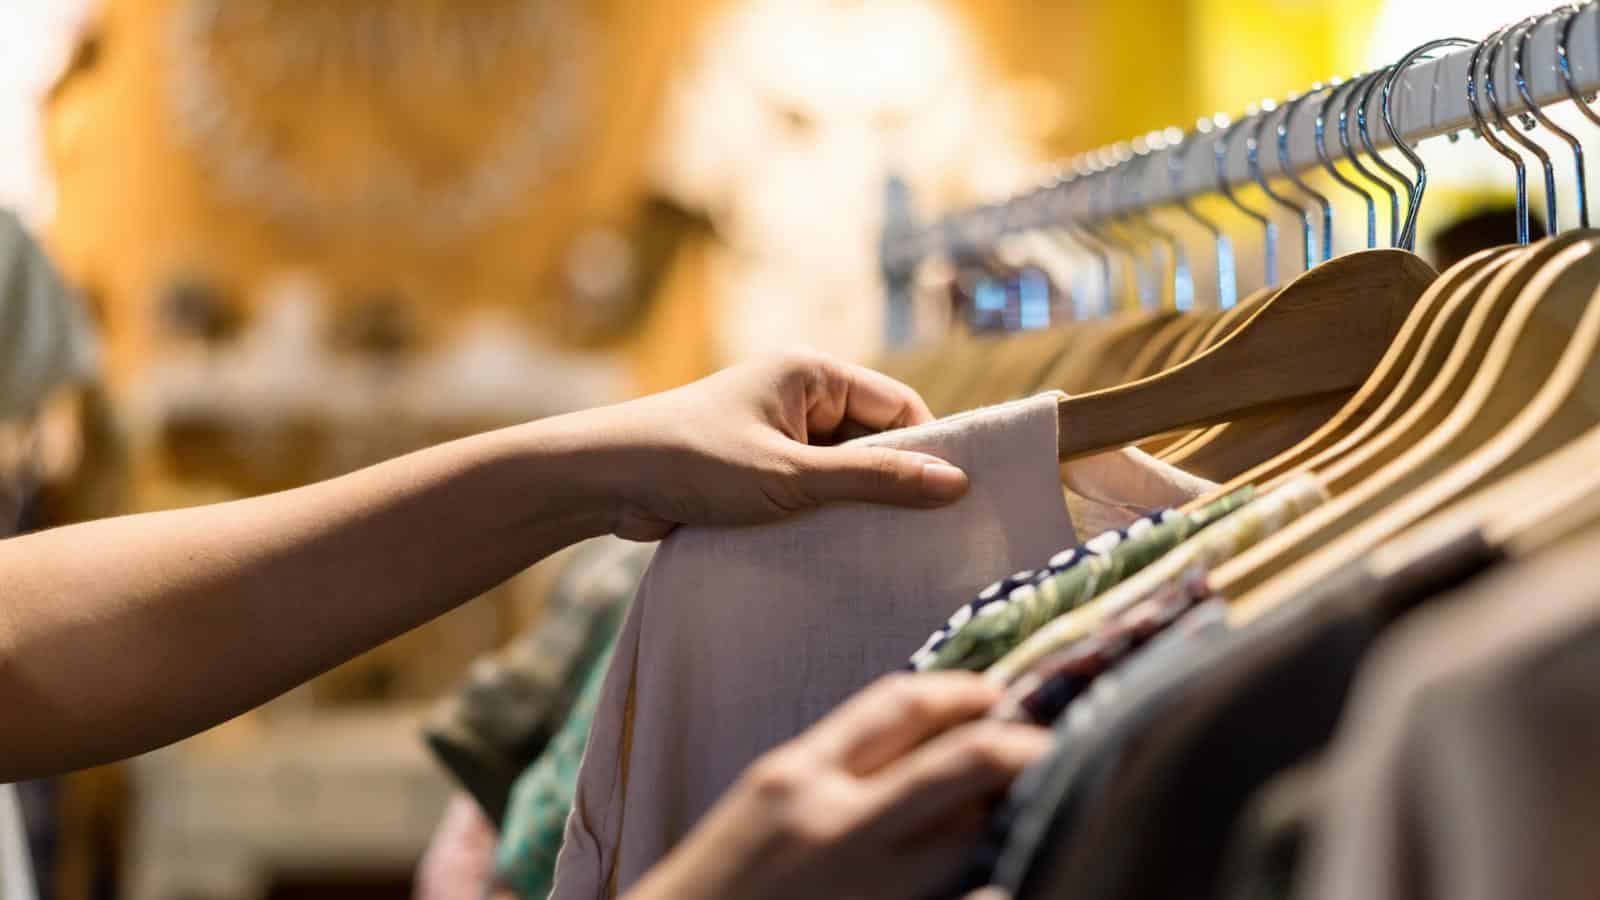 <p>If you need to pick up some items and want to do so at a low cost, try shopping at second-hand stores. You can get great deals on good-quality used clothes, furniture, and other household items, which will help you save money while also fulfilling your needs.</p>